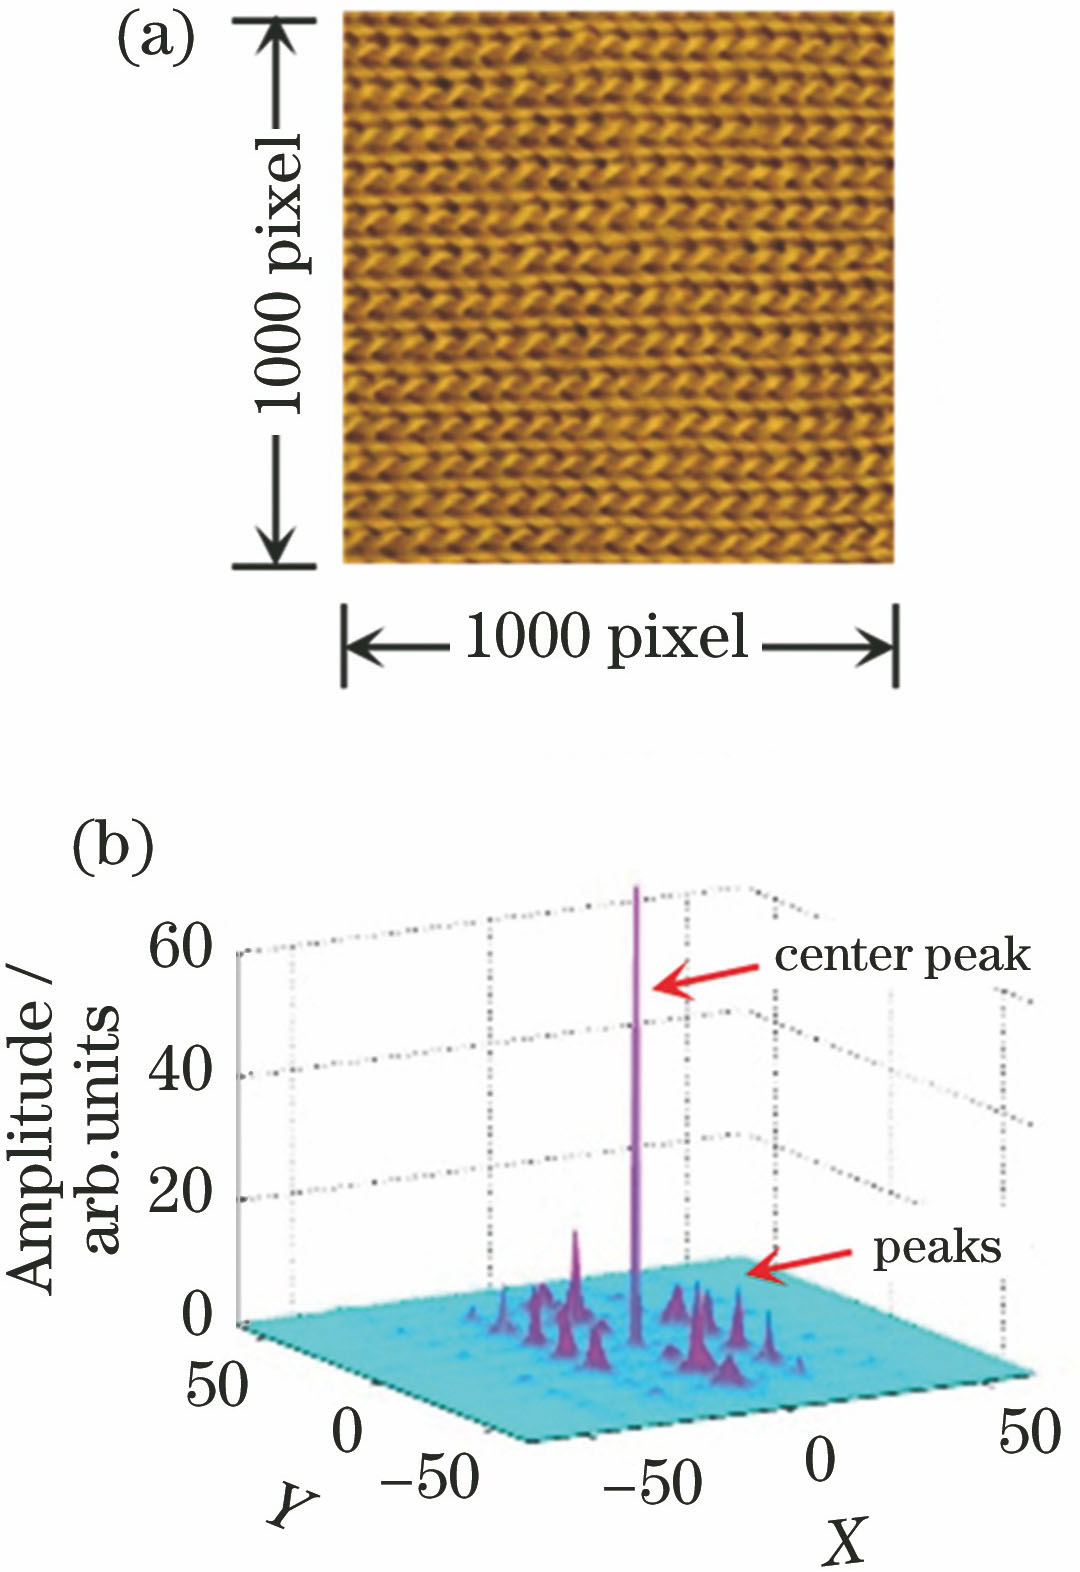 Typical periodic texture image and spectrum characteristic. (a) Fabric image; (b) 3D spectrum with a series of characteristic peaks